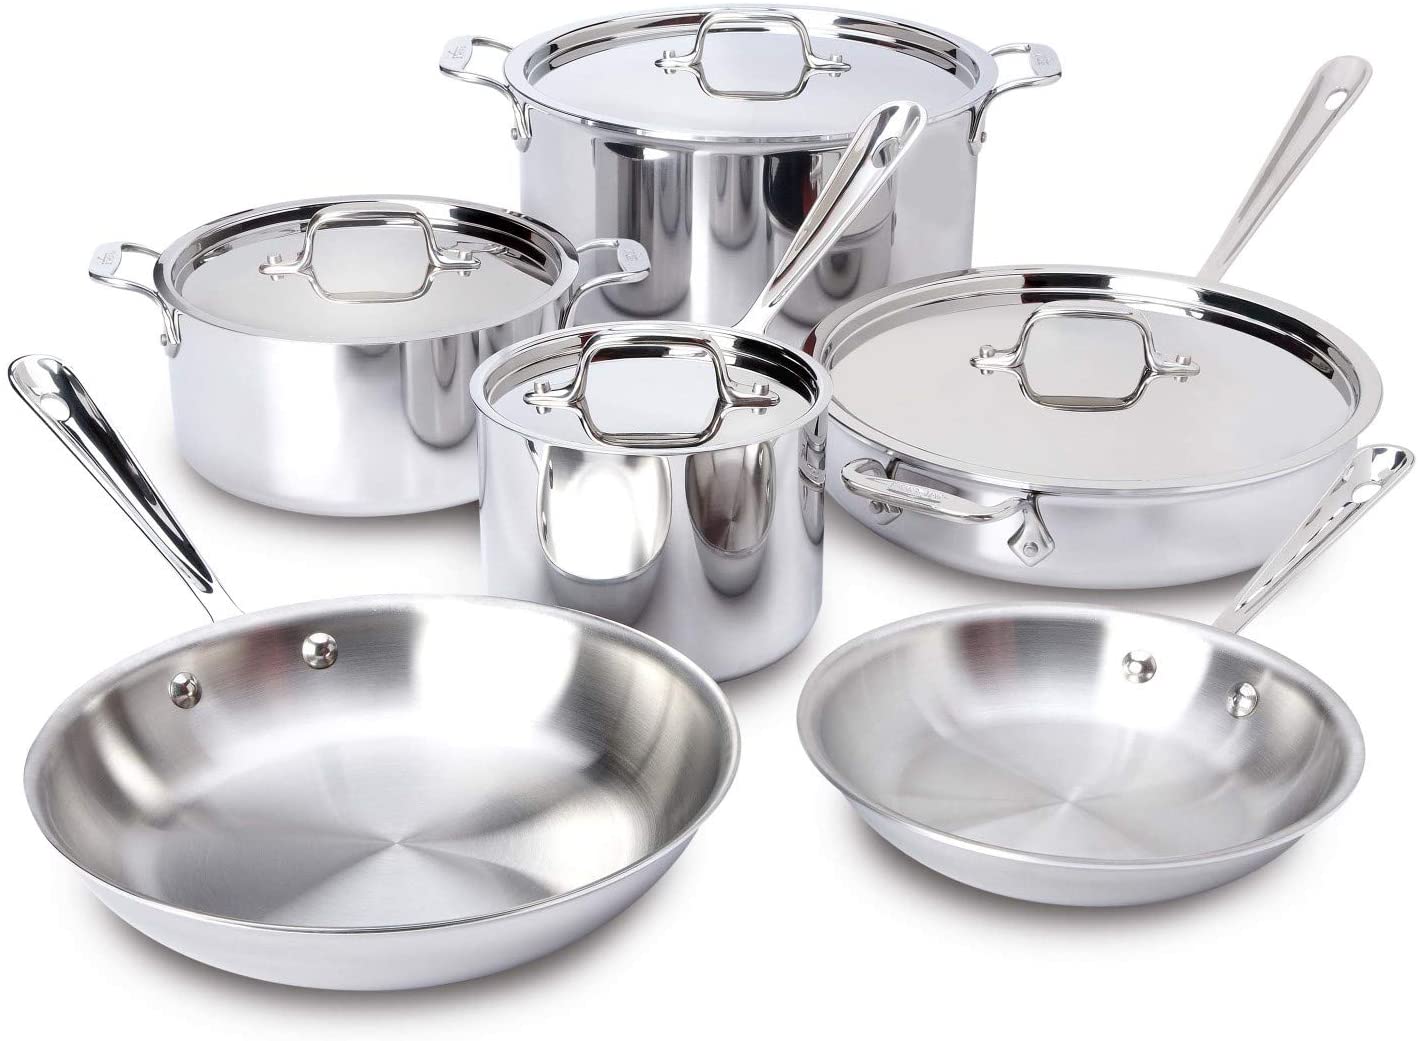 All-Clad 401877R Stainless Steel 3-Ply Bonded Dishwasher Safe Cookware Set